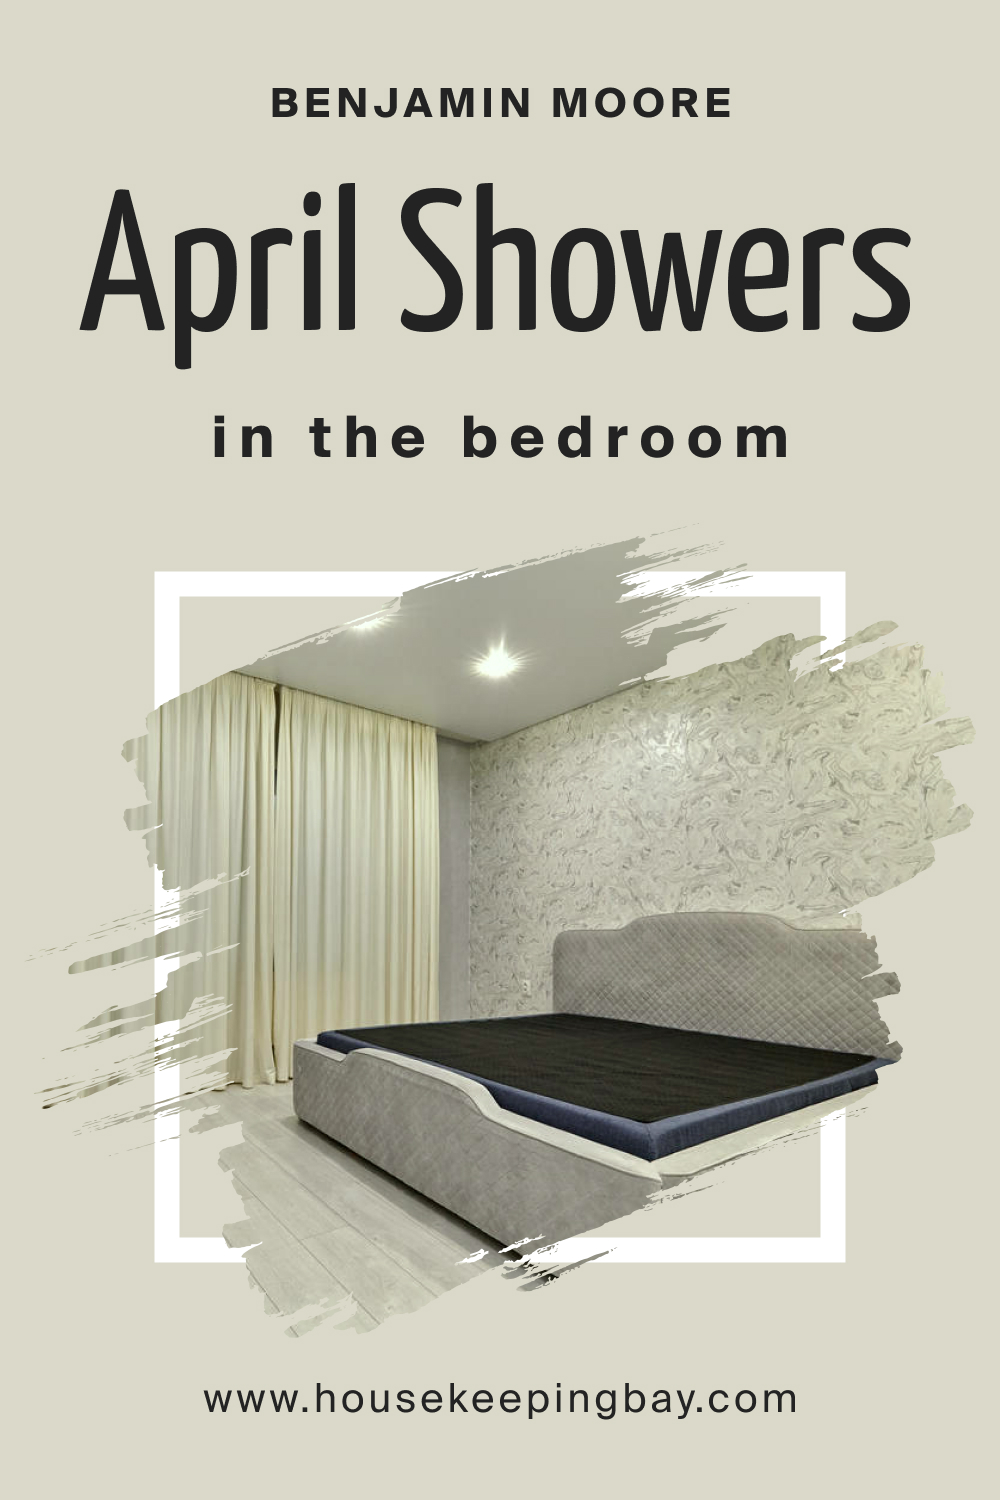 How to Use BM April Showers 1507 in the Bedroom?